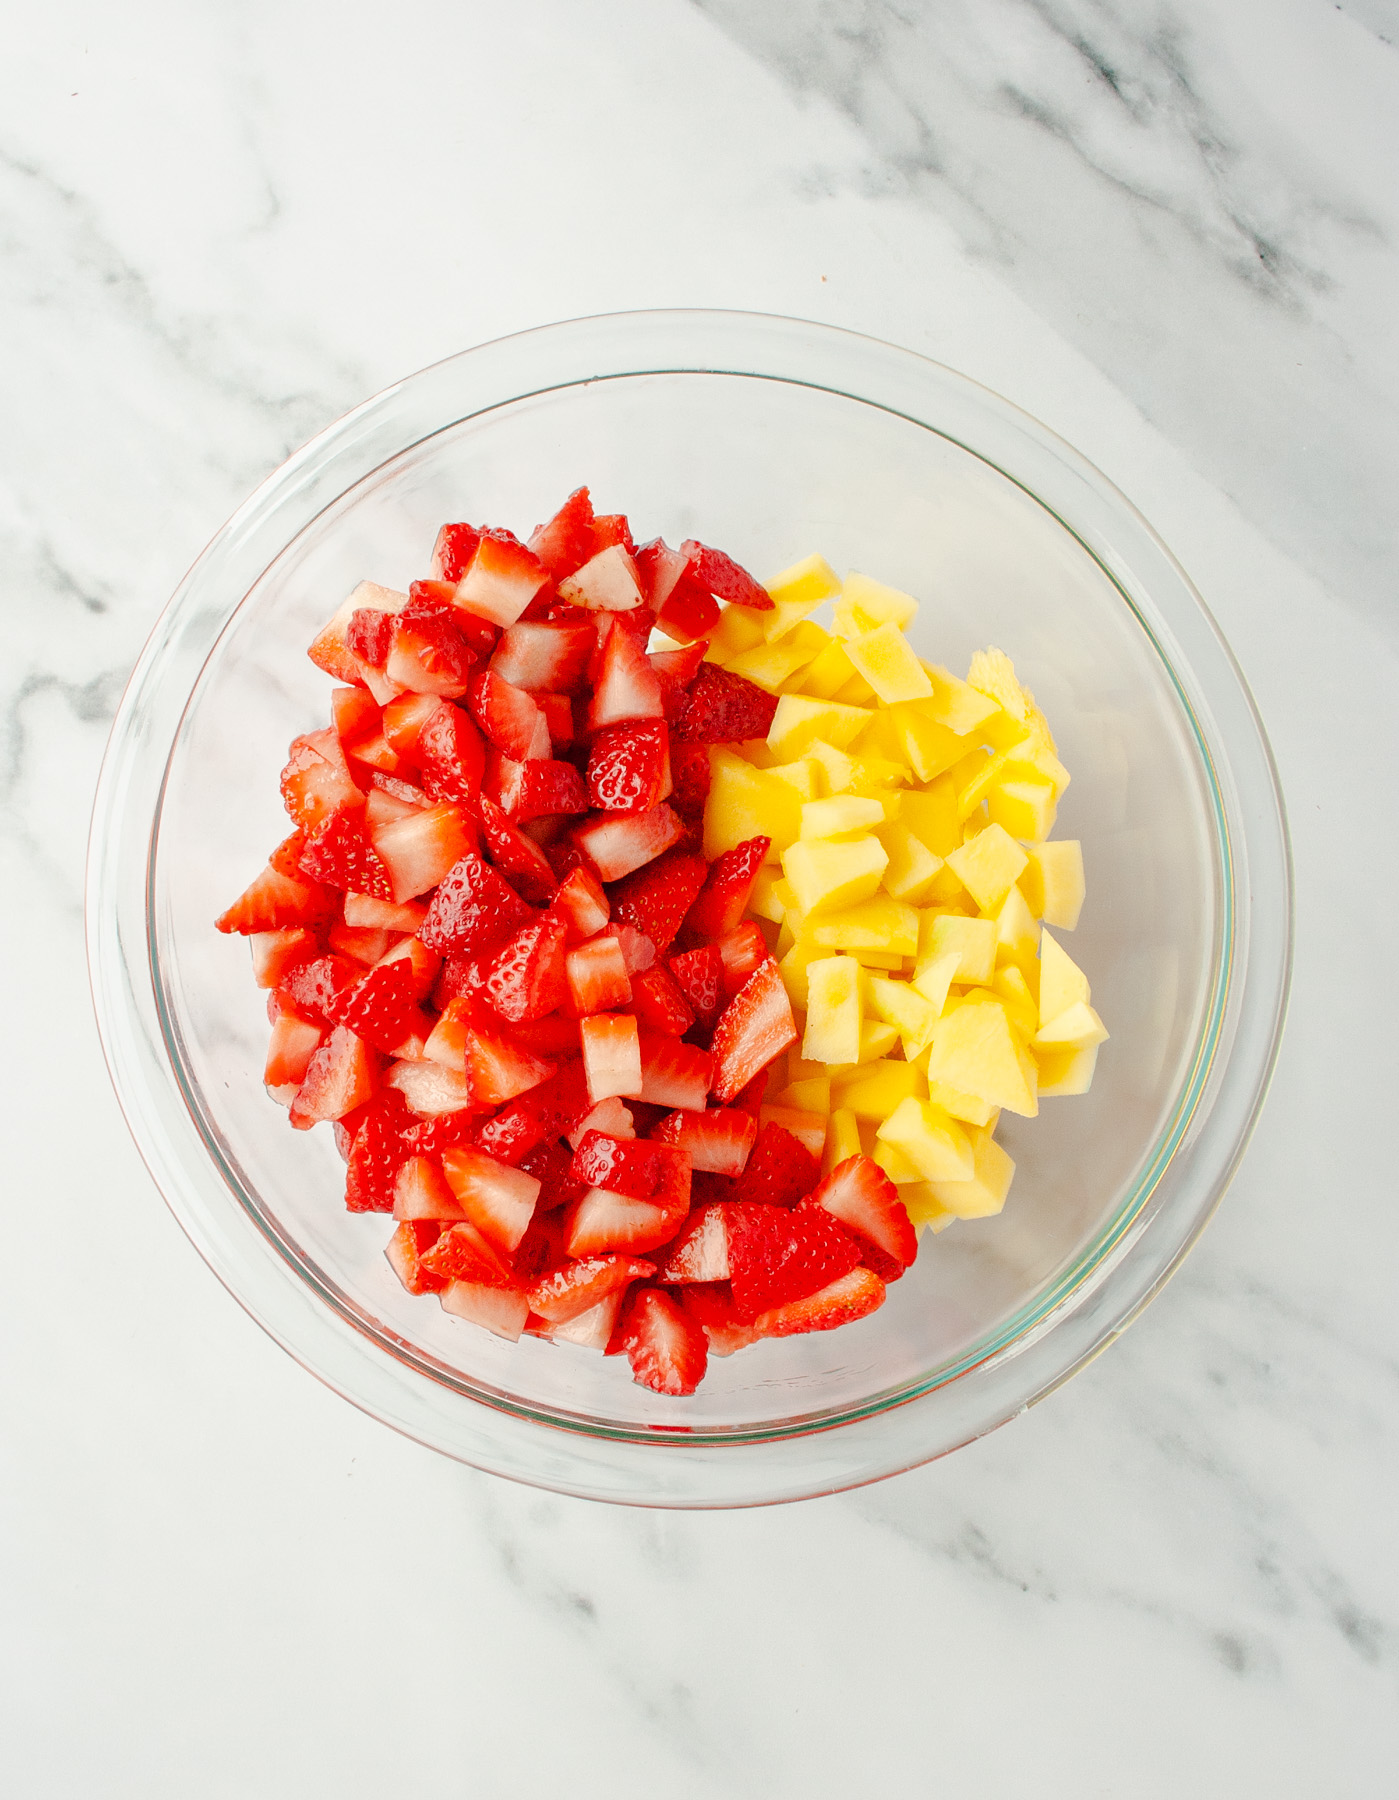 Strawberries and mango diced in a bowl.